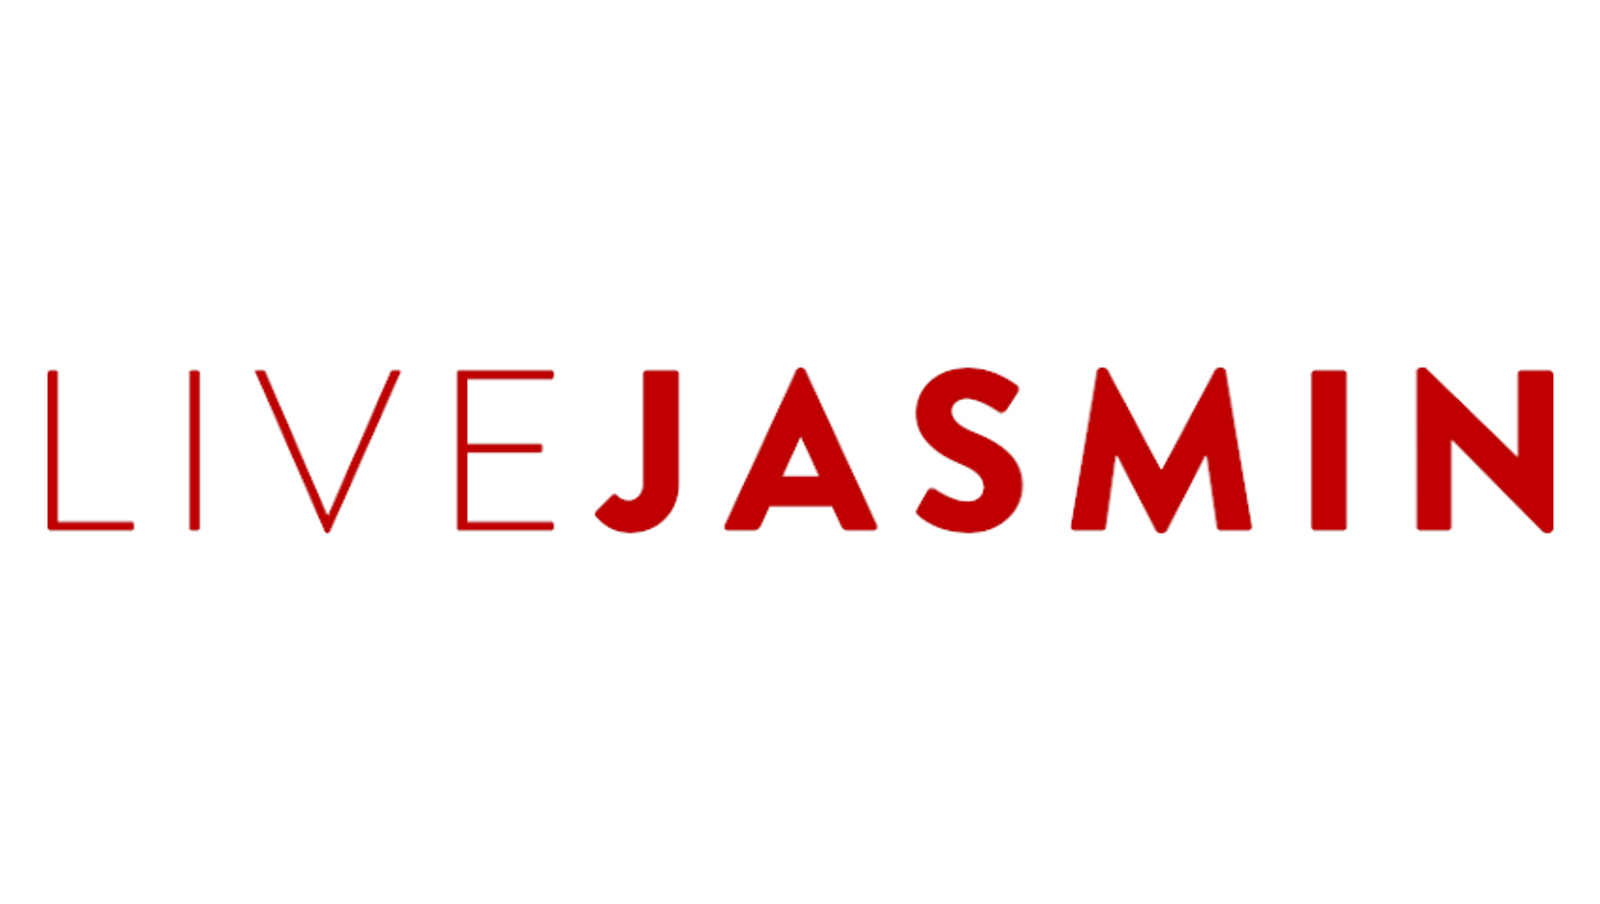 LiveJasmin Announces New Top Model Contest Winners, Prizes | AVN